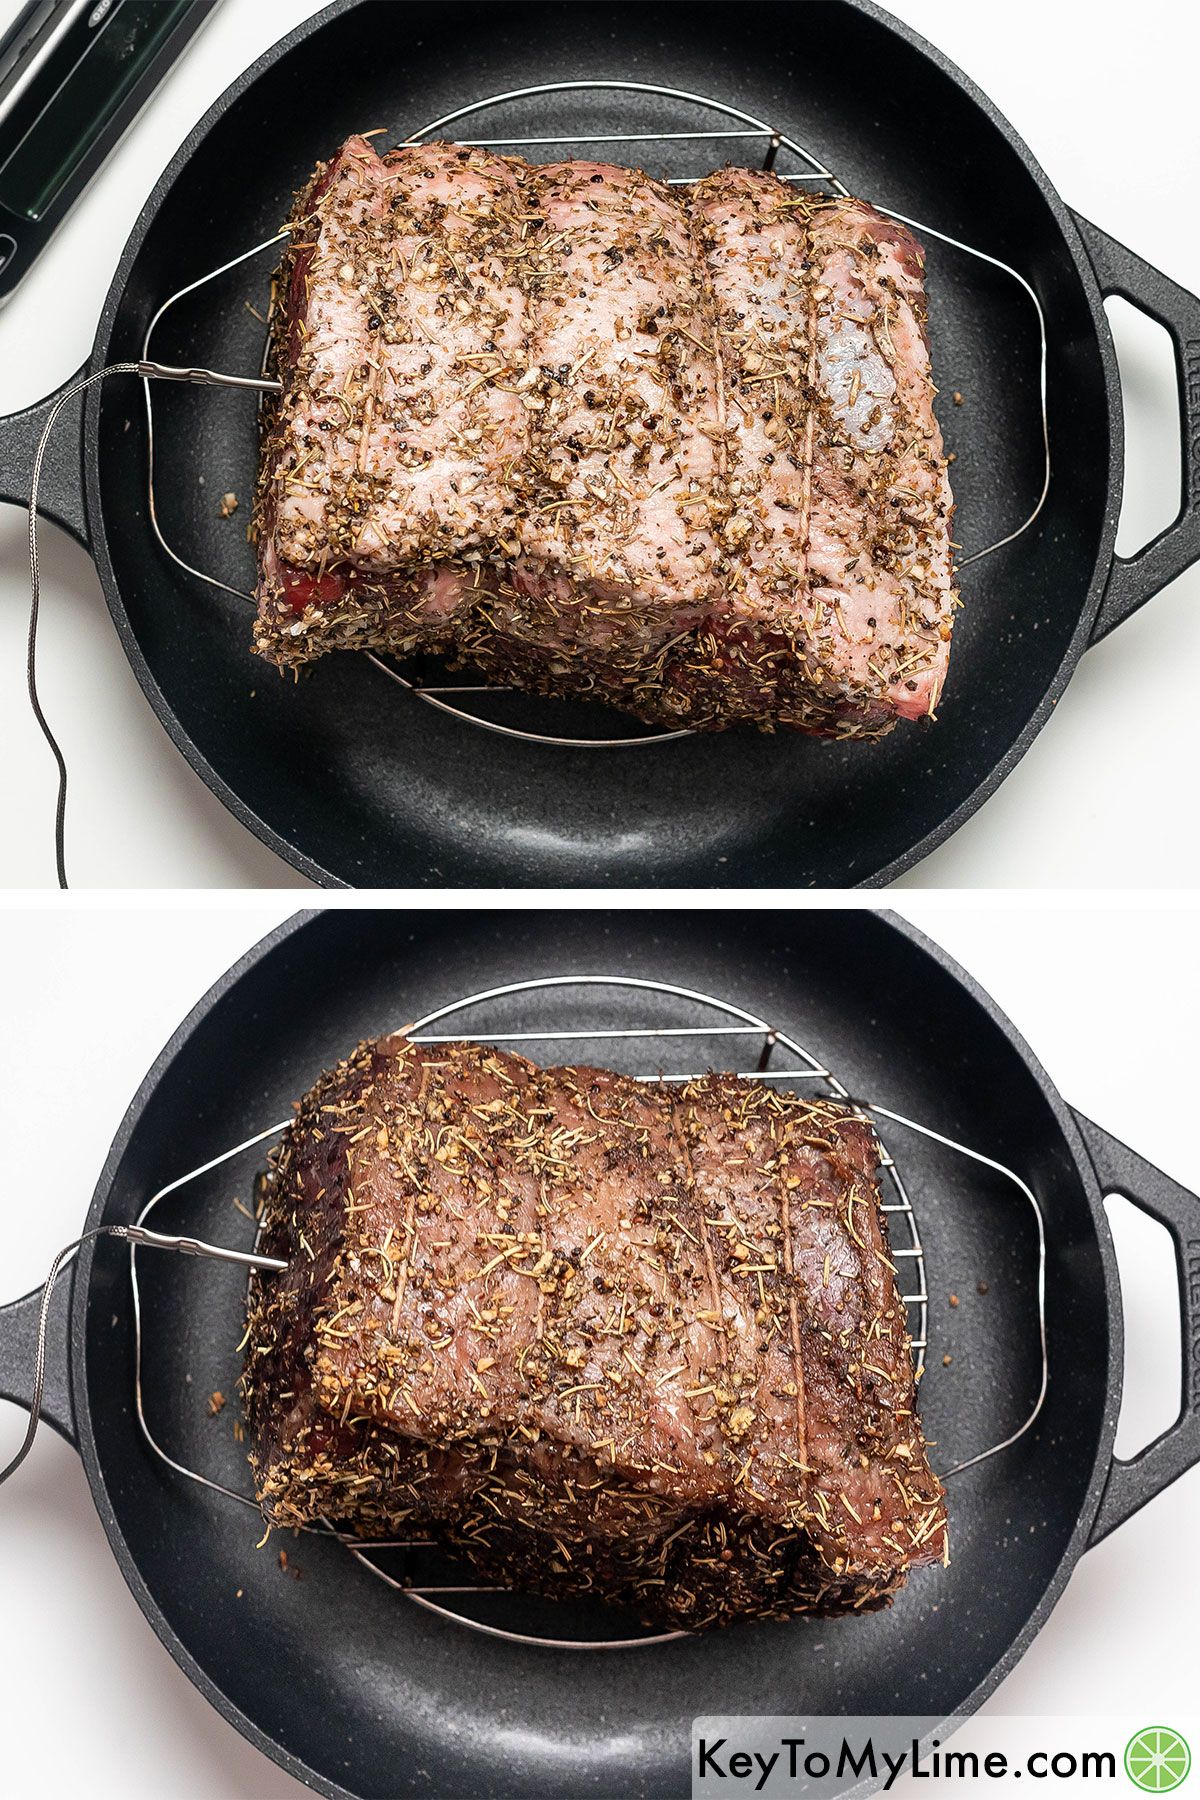 Placing the roast onto a wire rack then inserting an oven safe thermometer into the center of the roast.